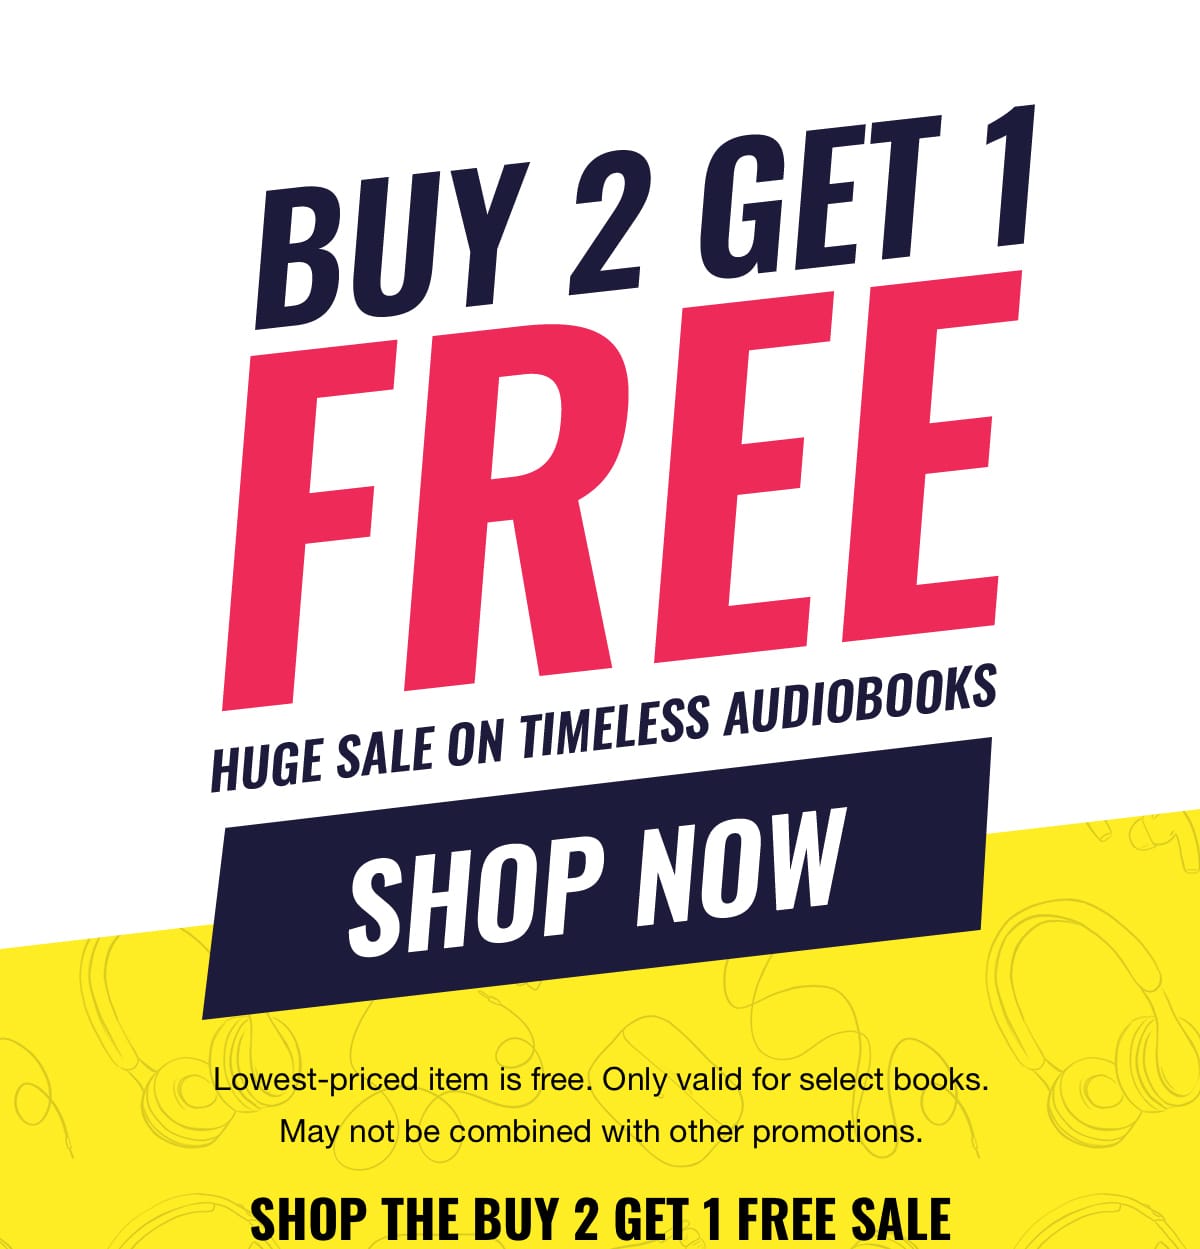 Buy 2 Get 1 Free. Huge sale on timeless audiobooks. Shop now. Lowest-priced item is free. Only valid for select books. May not be combined with other promotions. Shop the buy 2 get 1 free sale.